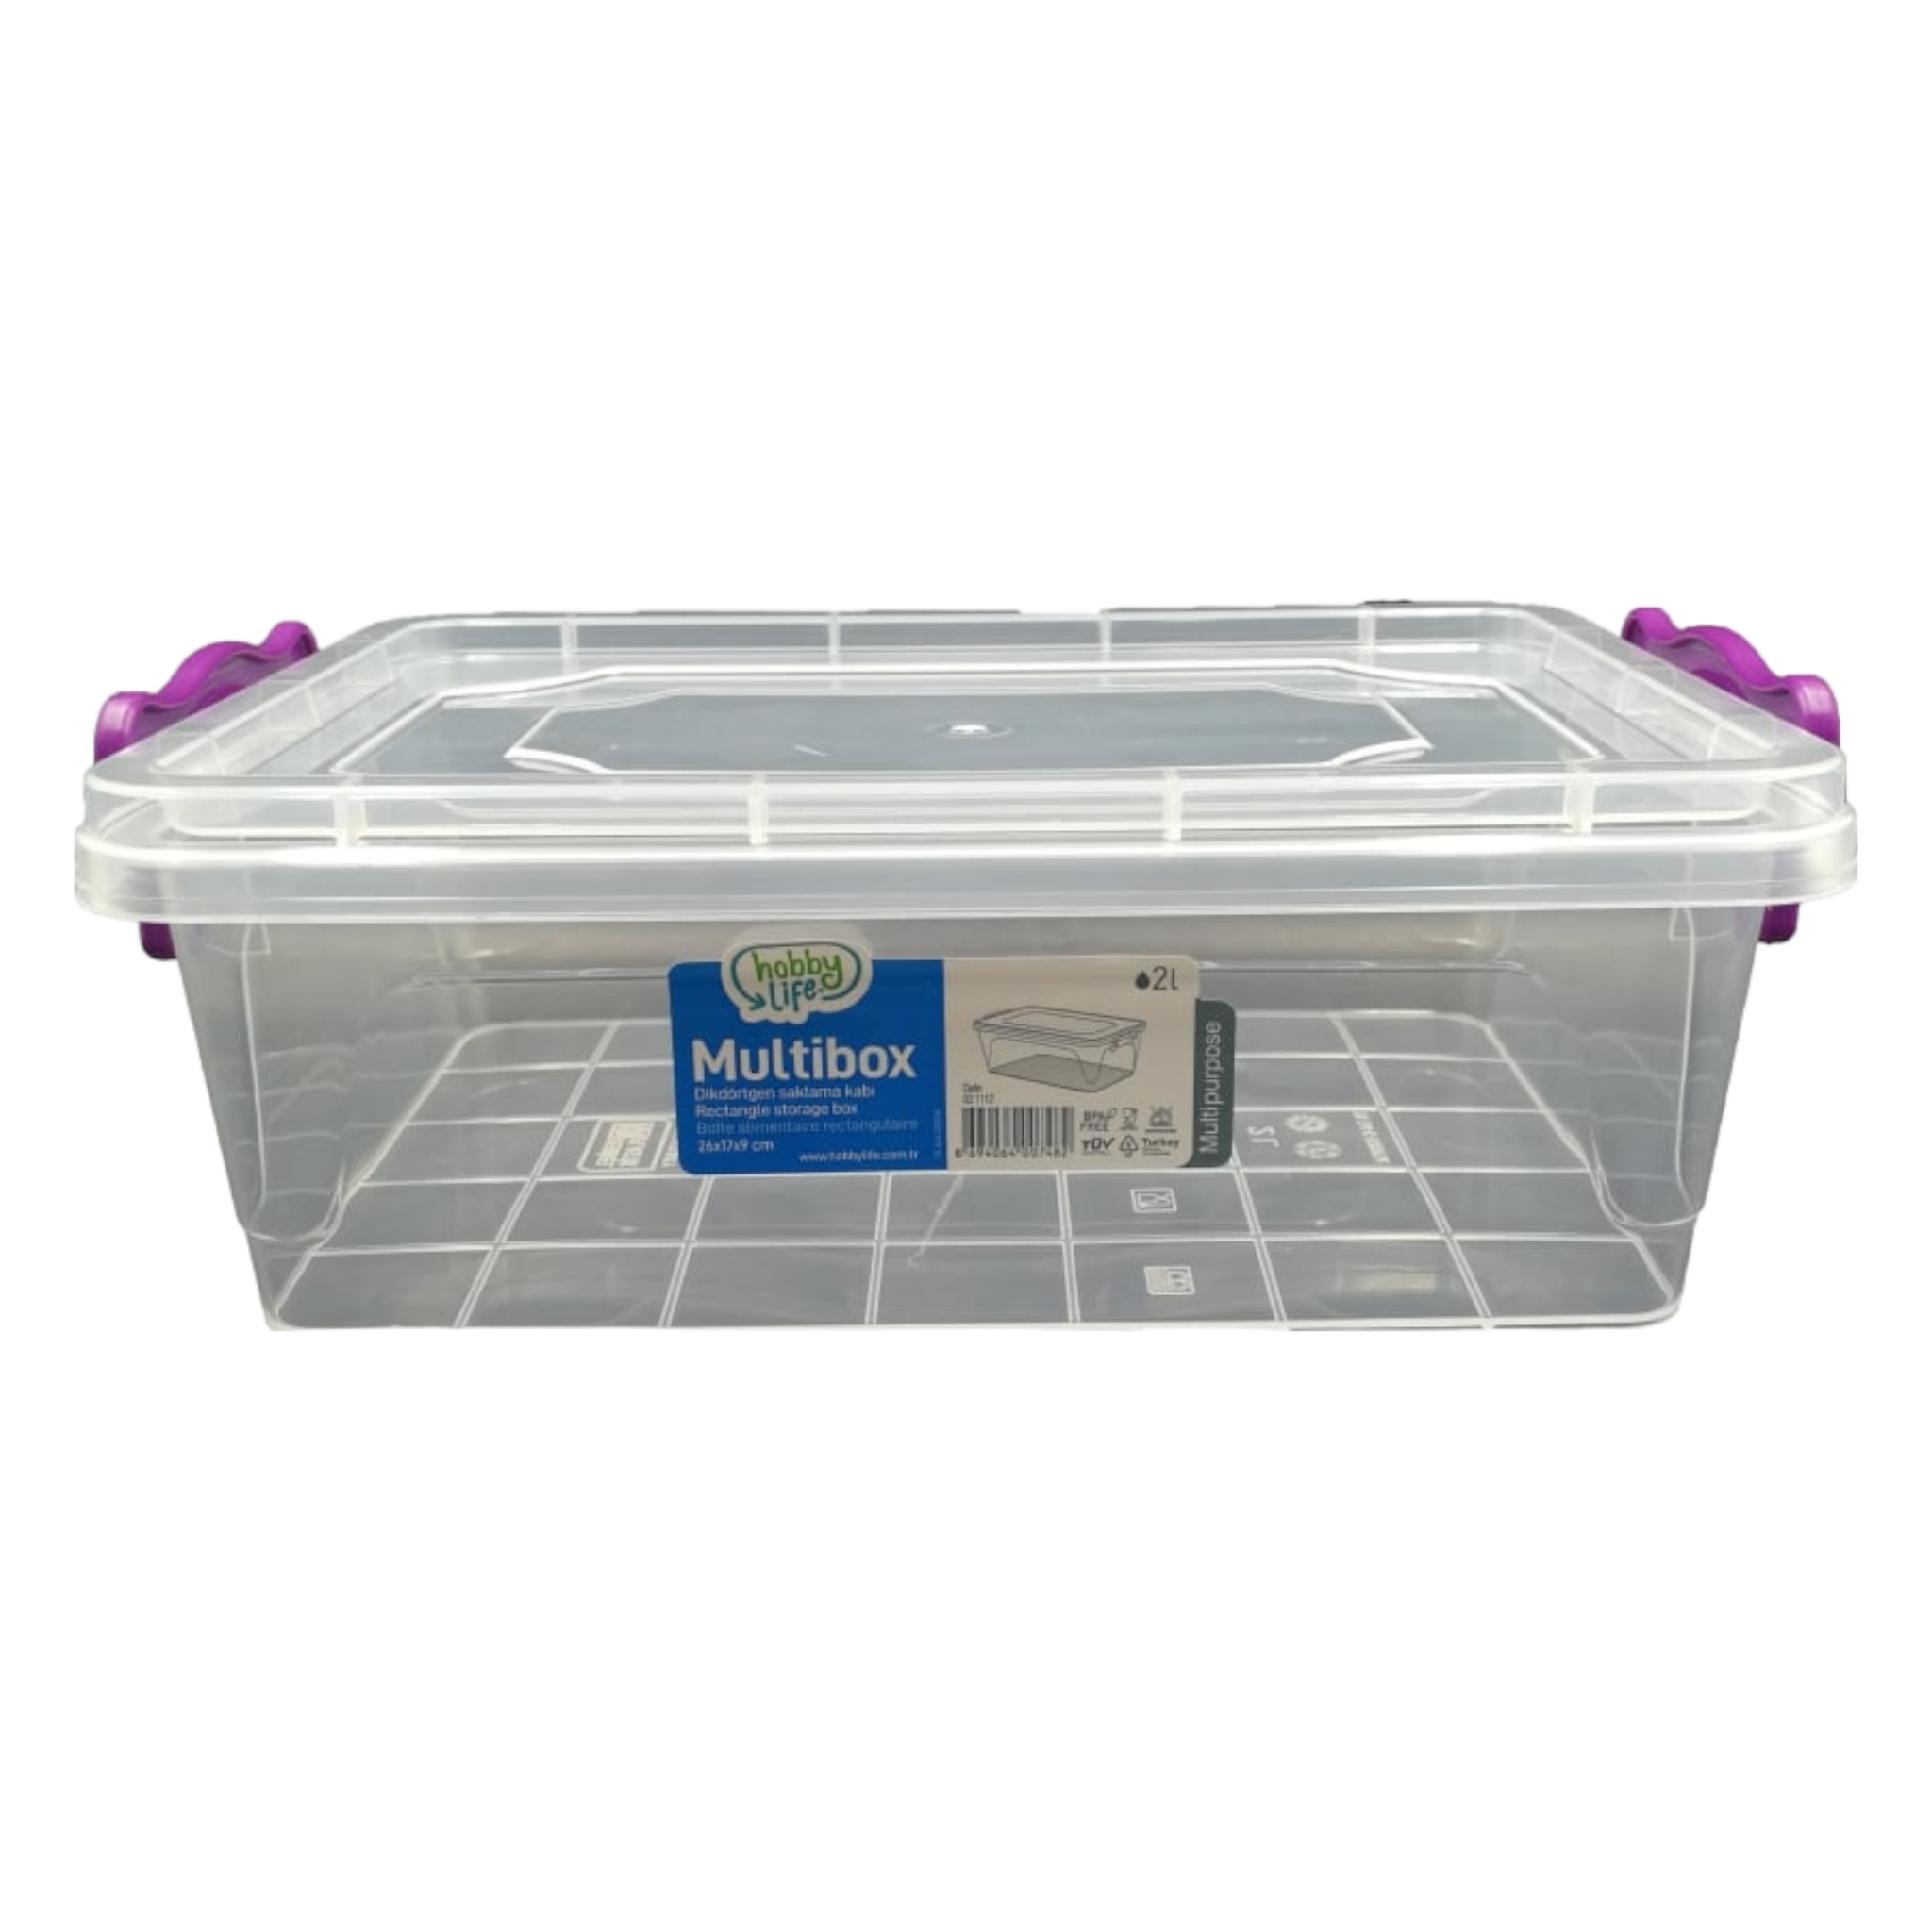 Hobby Life Plastic Storage Flat Storage Utility Container Multi Box Rectangle 2L 021112